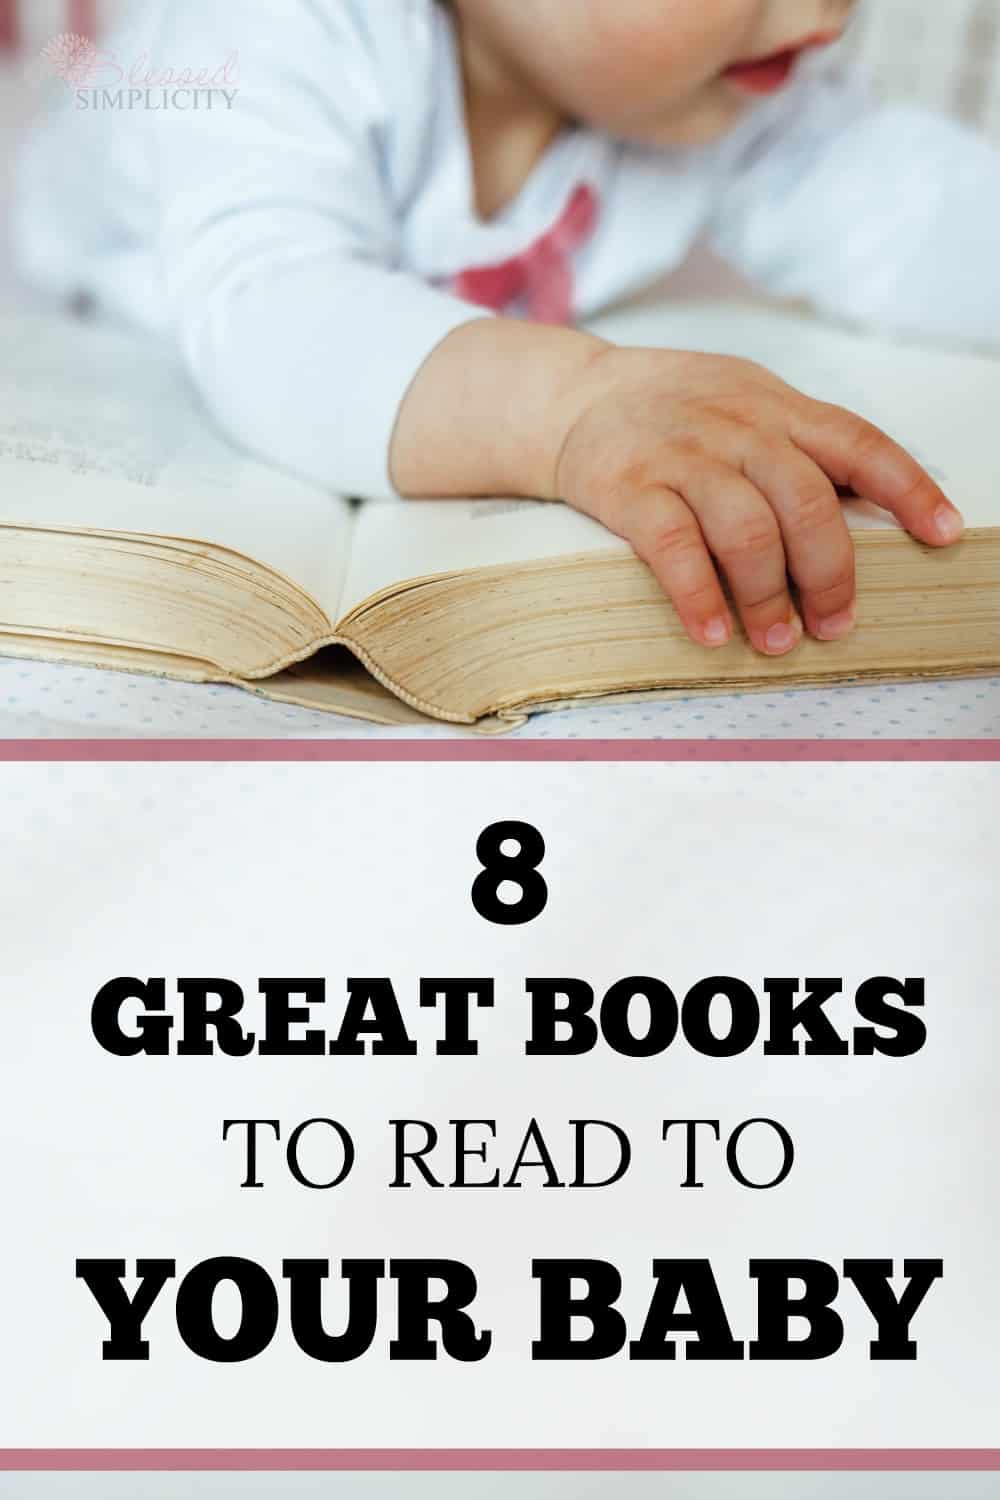 Reading aloud to your baby has many benefits. These classics are favorite read alouds for newborns in our family.